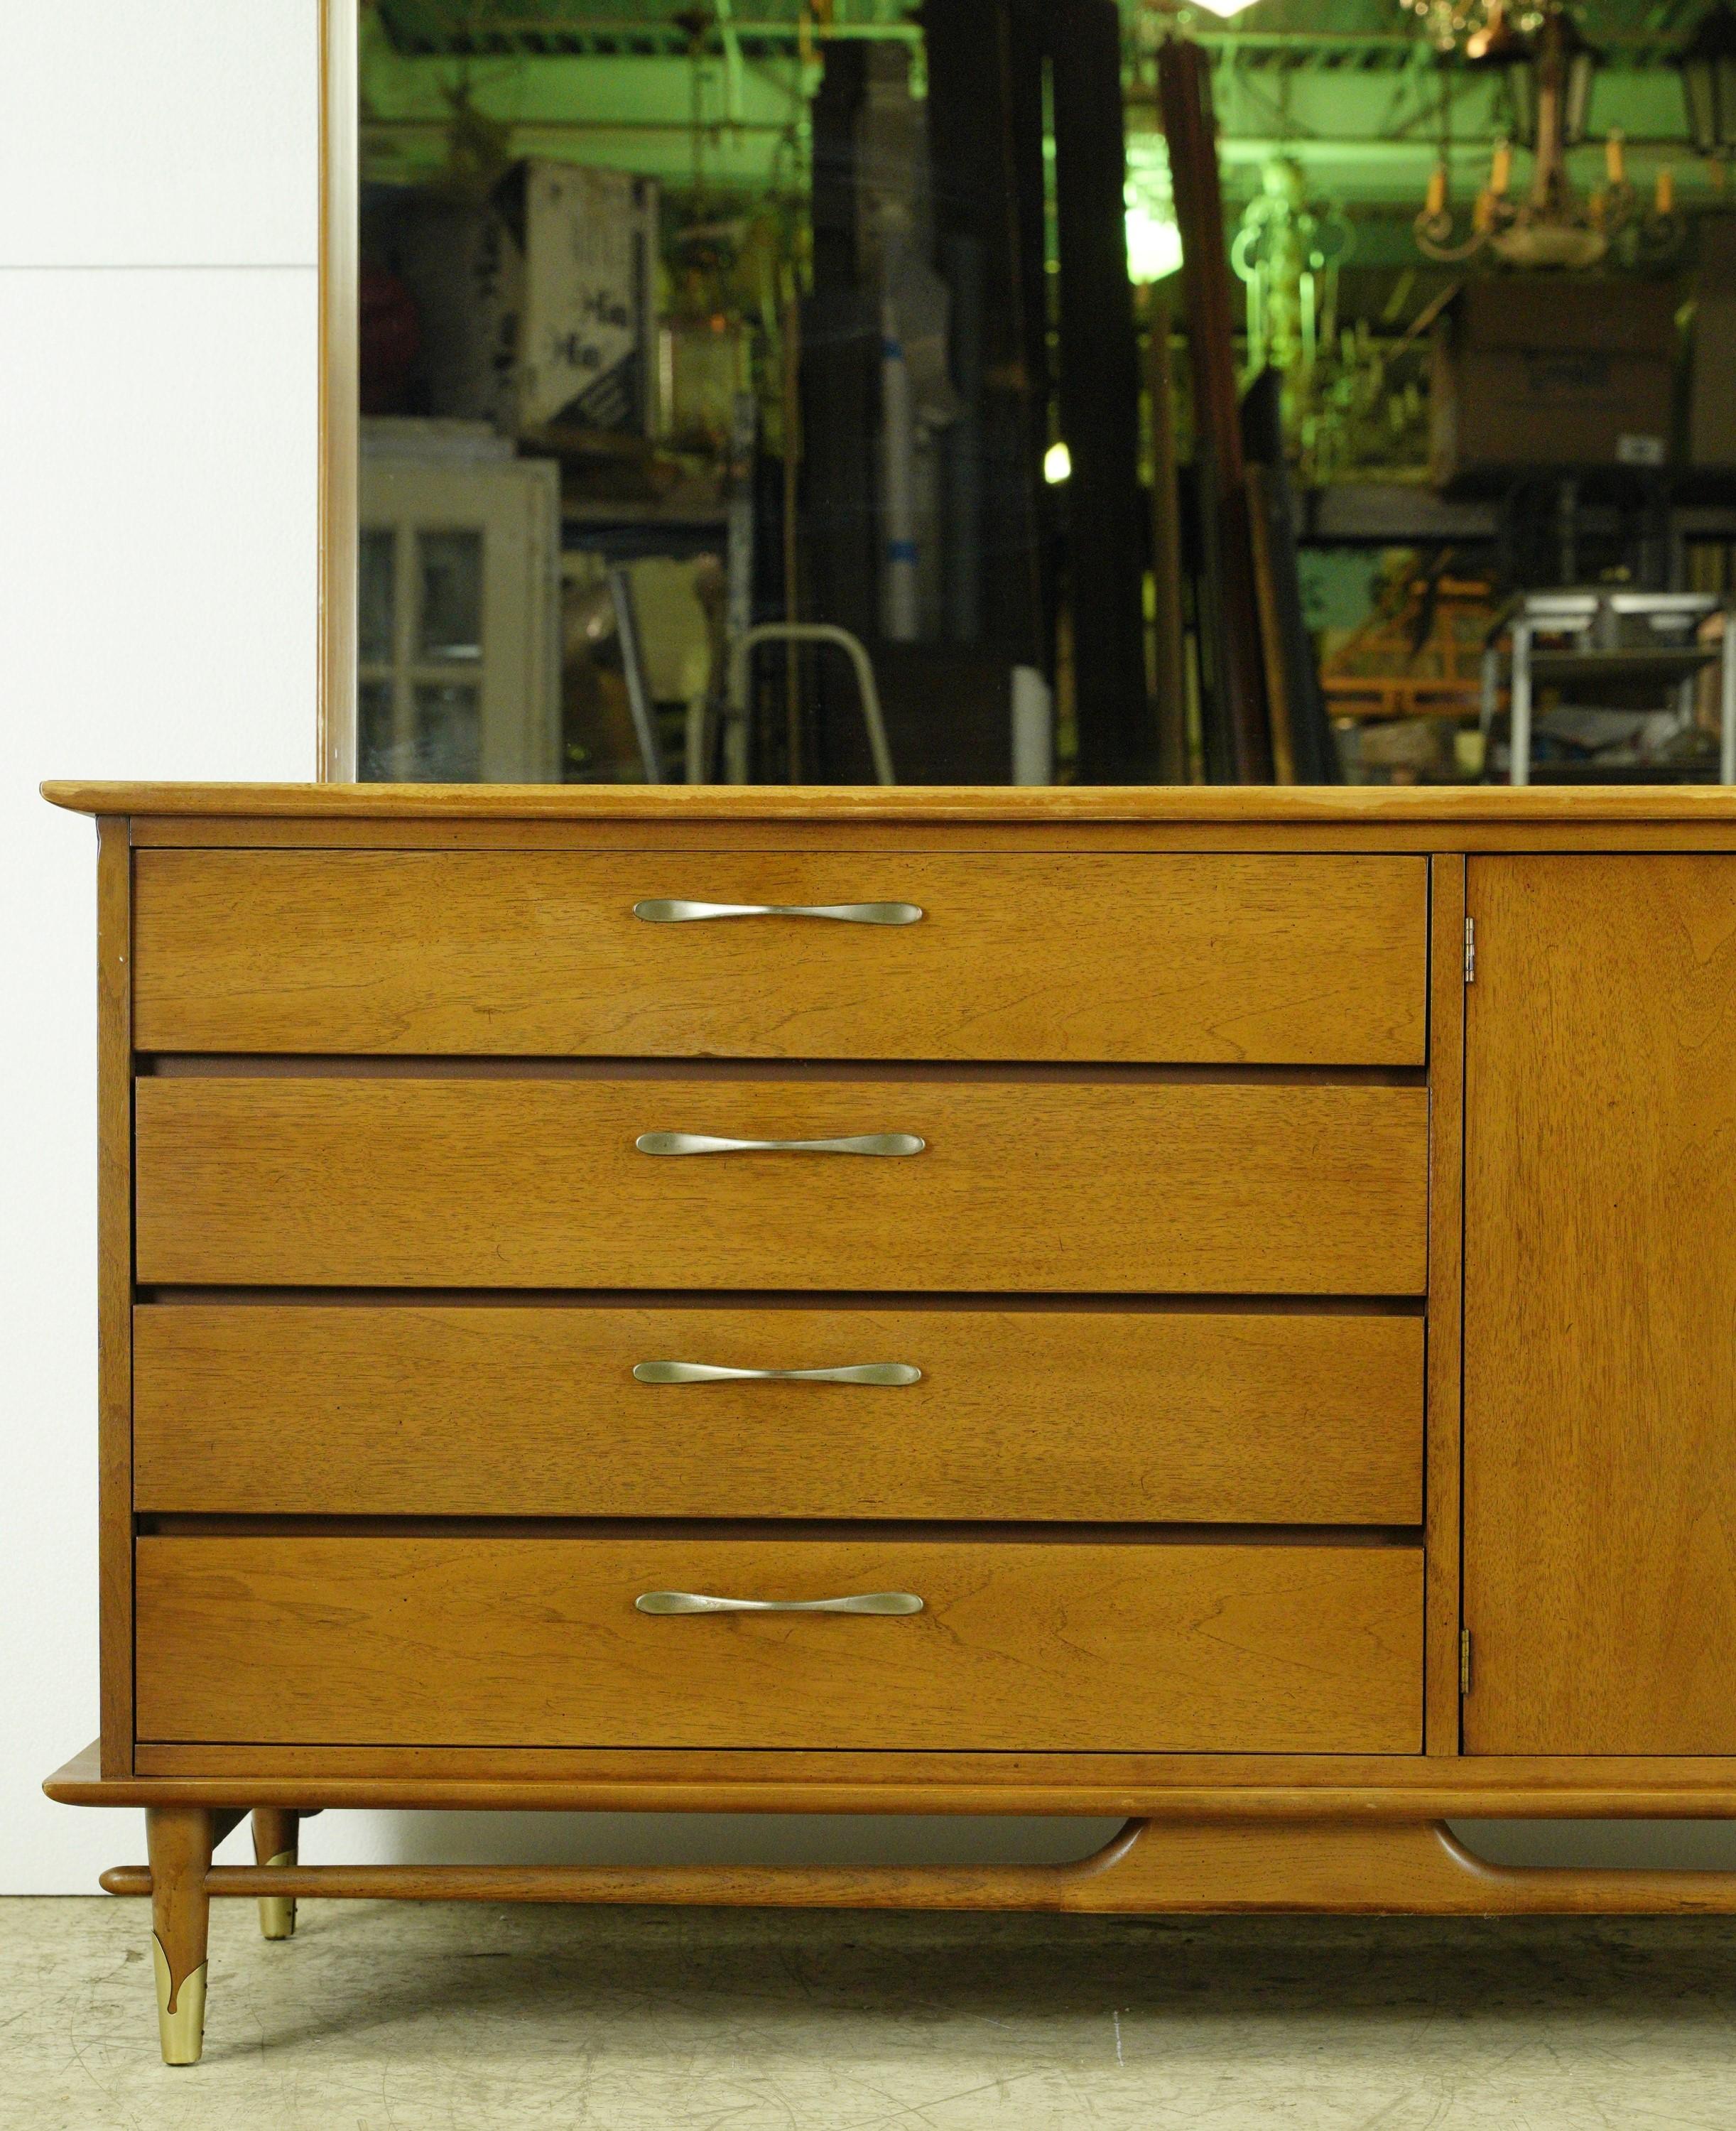 Medium tone Mid-Century Modern chestnut dresser with four drawers, two cabinet doors and a large rectangular mirror. Made by Lane. Good condition with appropriate wear from age. One available. Please note, this item is located in one of our NYC